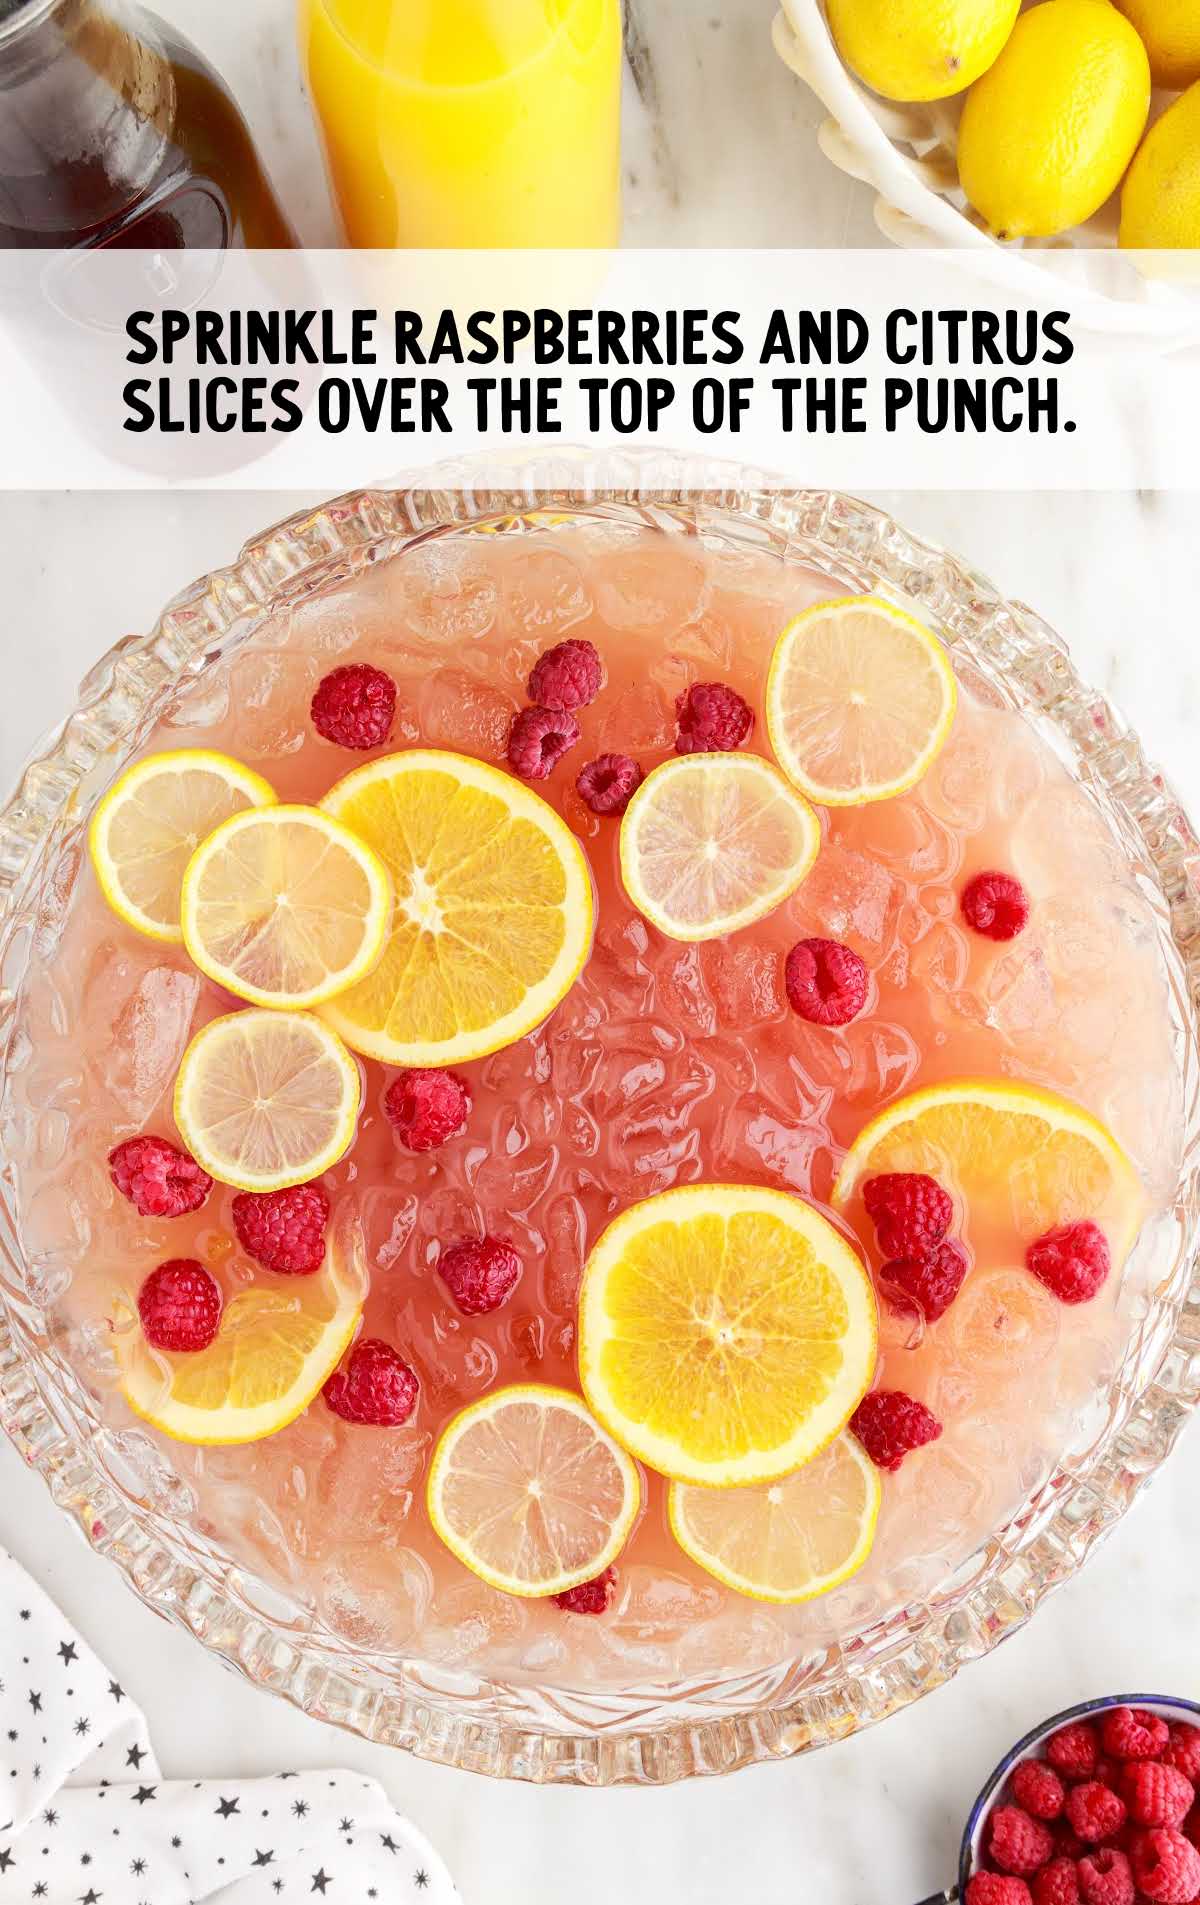 raspberries and slices of lemon added to the punch bowl